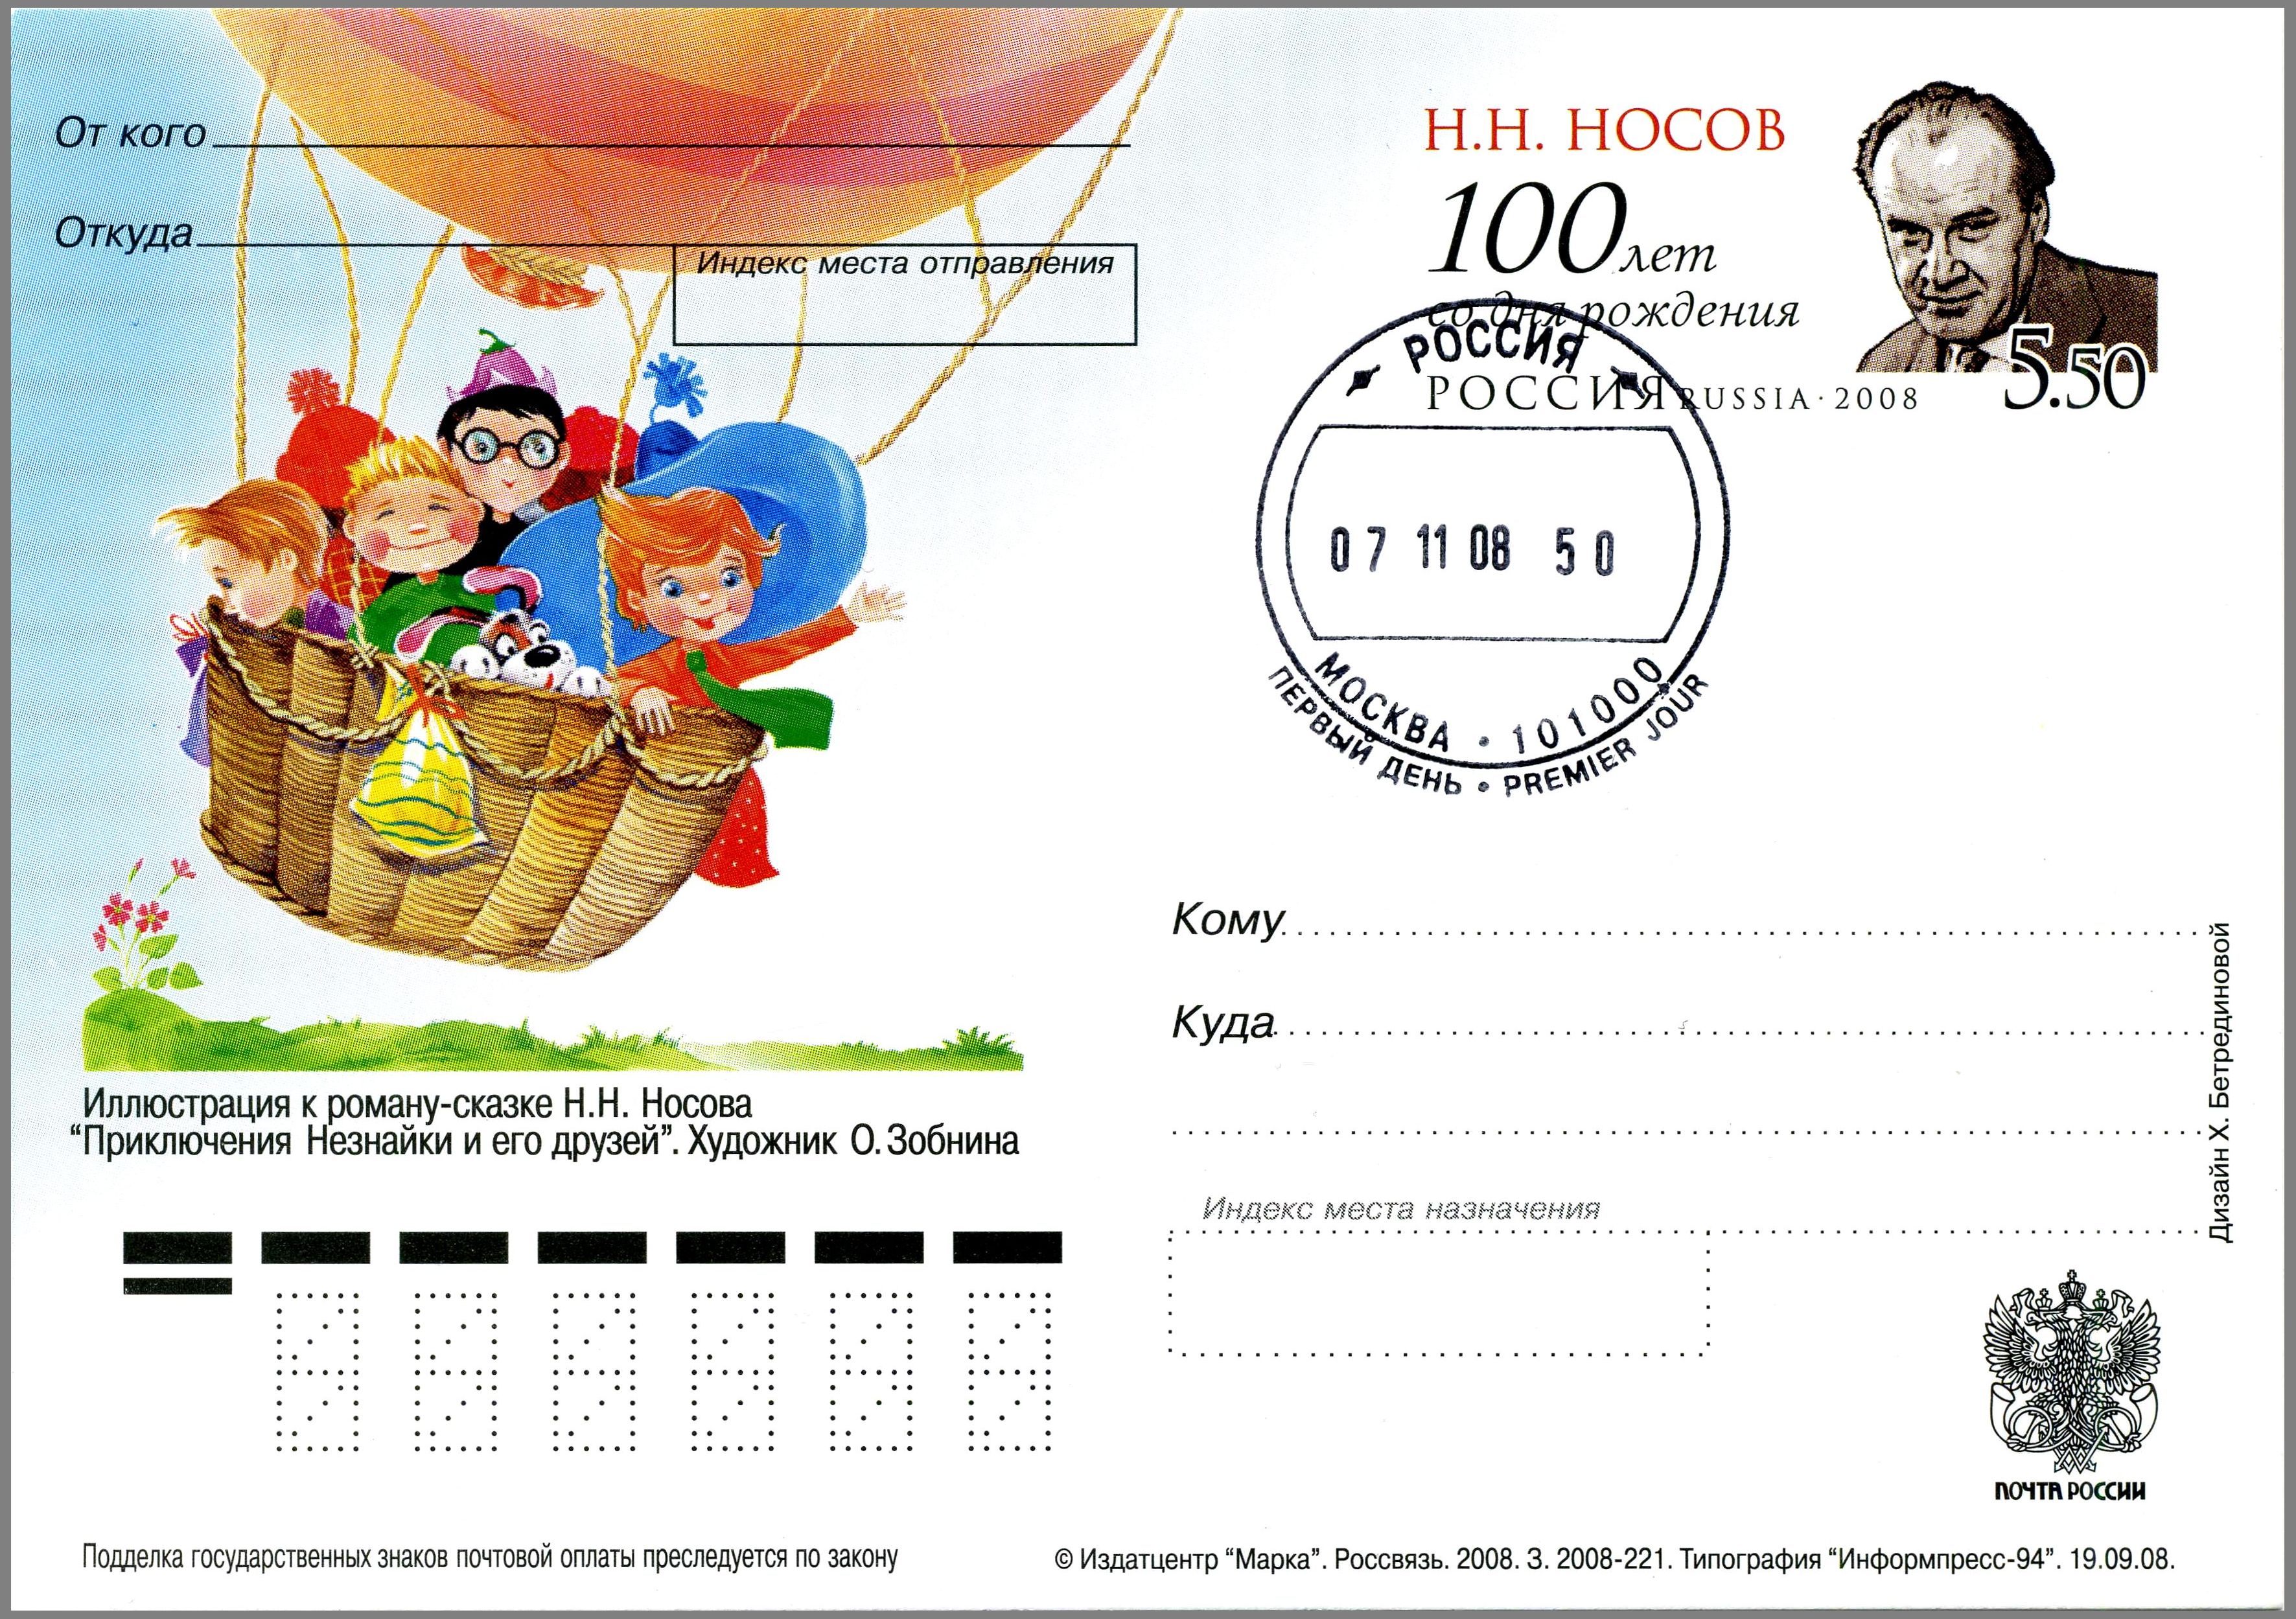 http://dic.academic.ru/pictures/wiki/files/68/Dunno_and_his_friends_Postal_card_Russia_2008.jpg